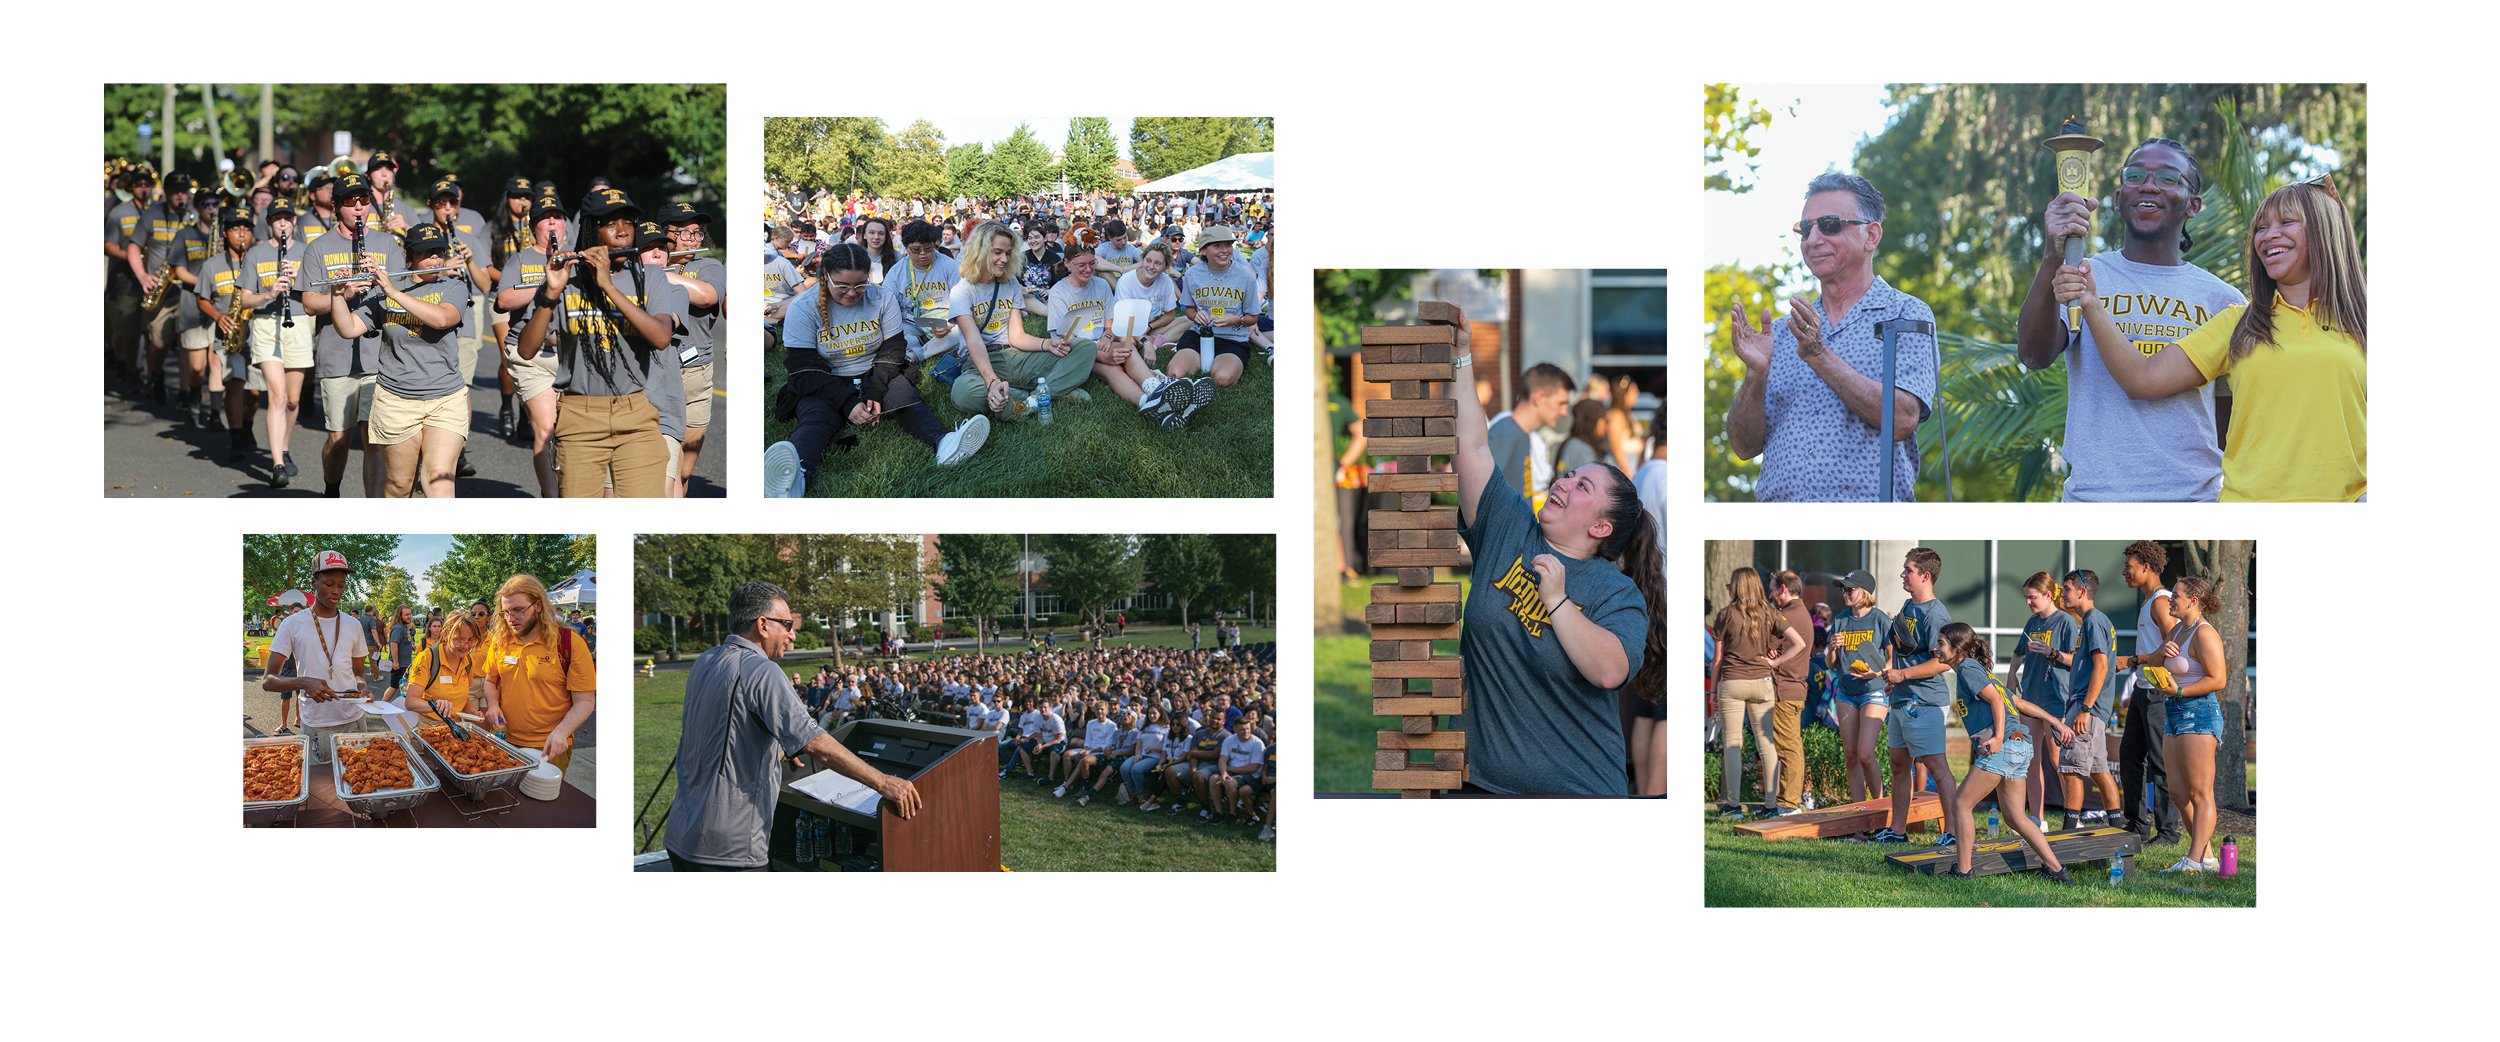 Various photos from Rowan University's President's Welcome & Picnic